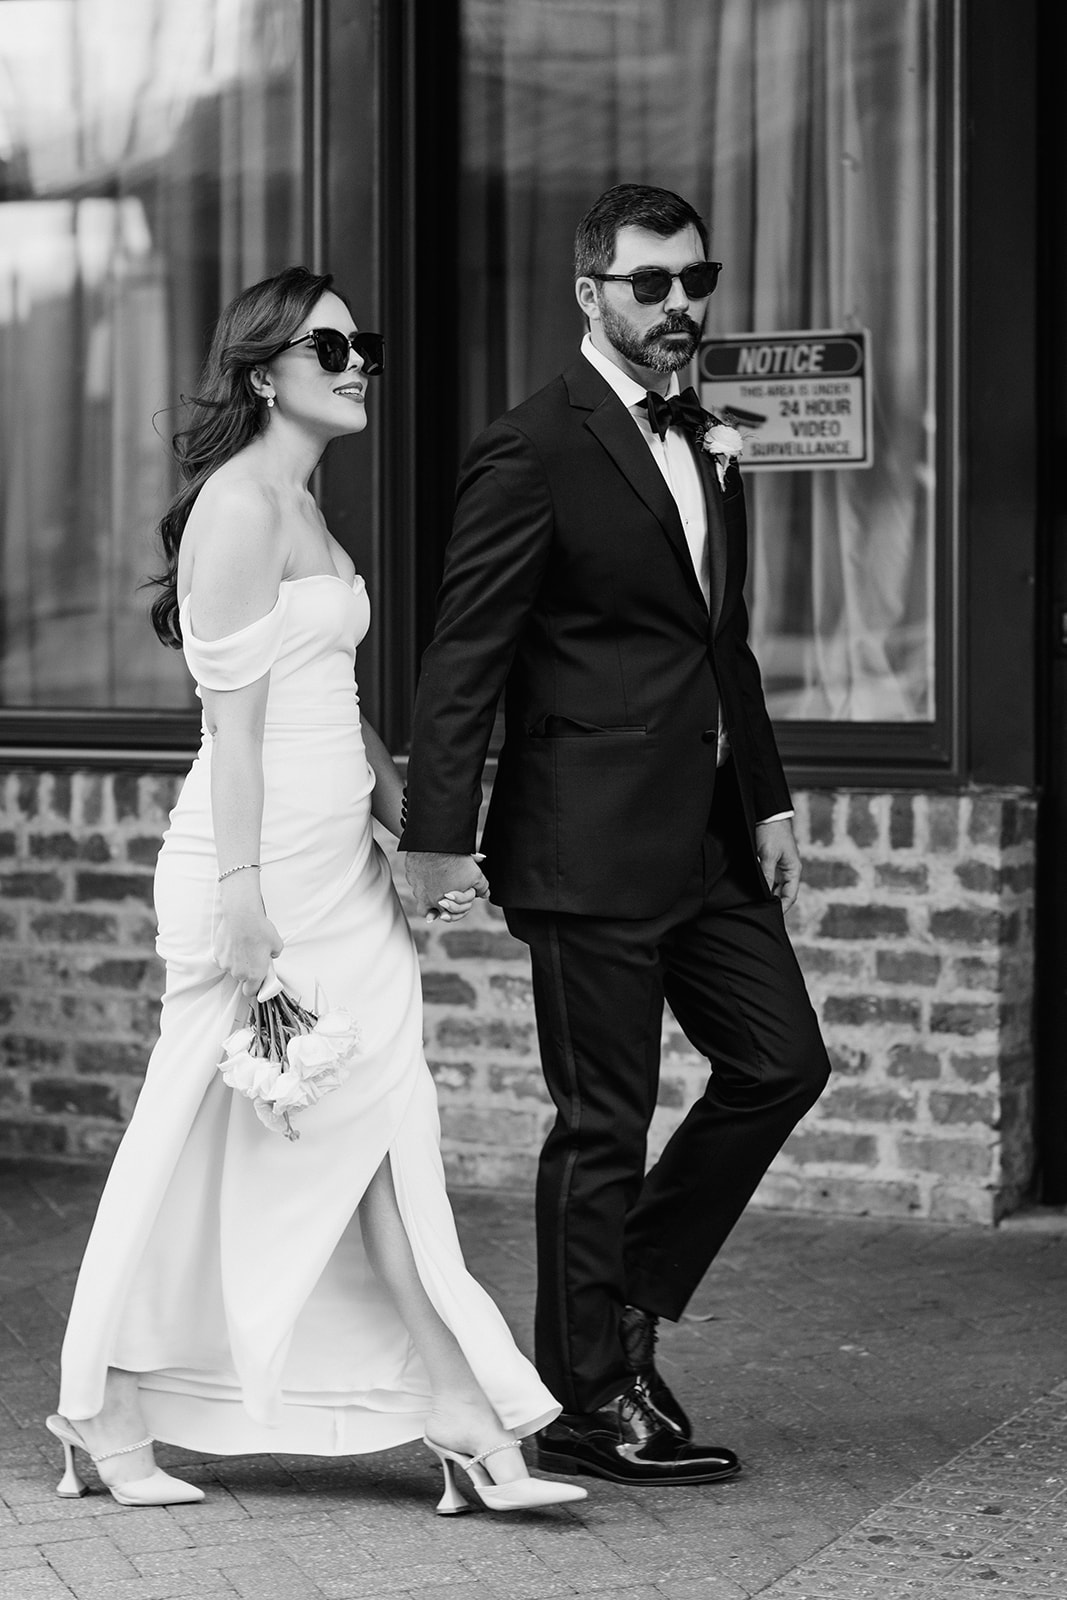 French Quarter wedding day photos in the heart of New Orleans